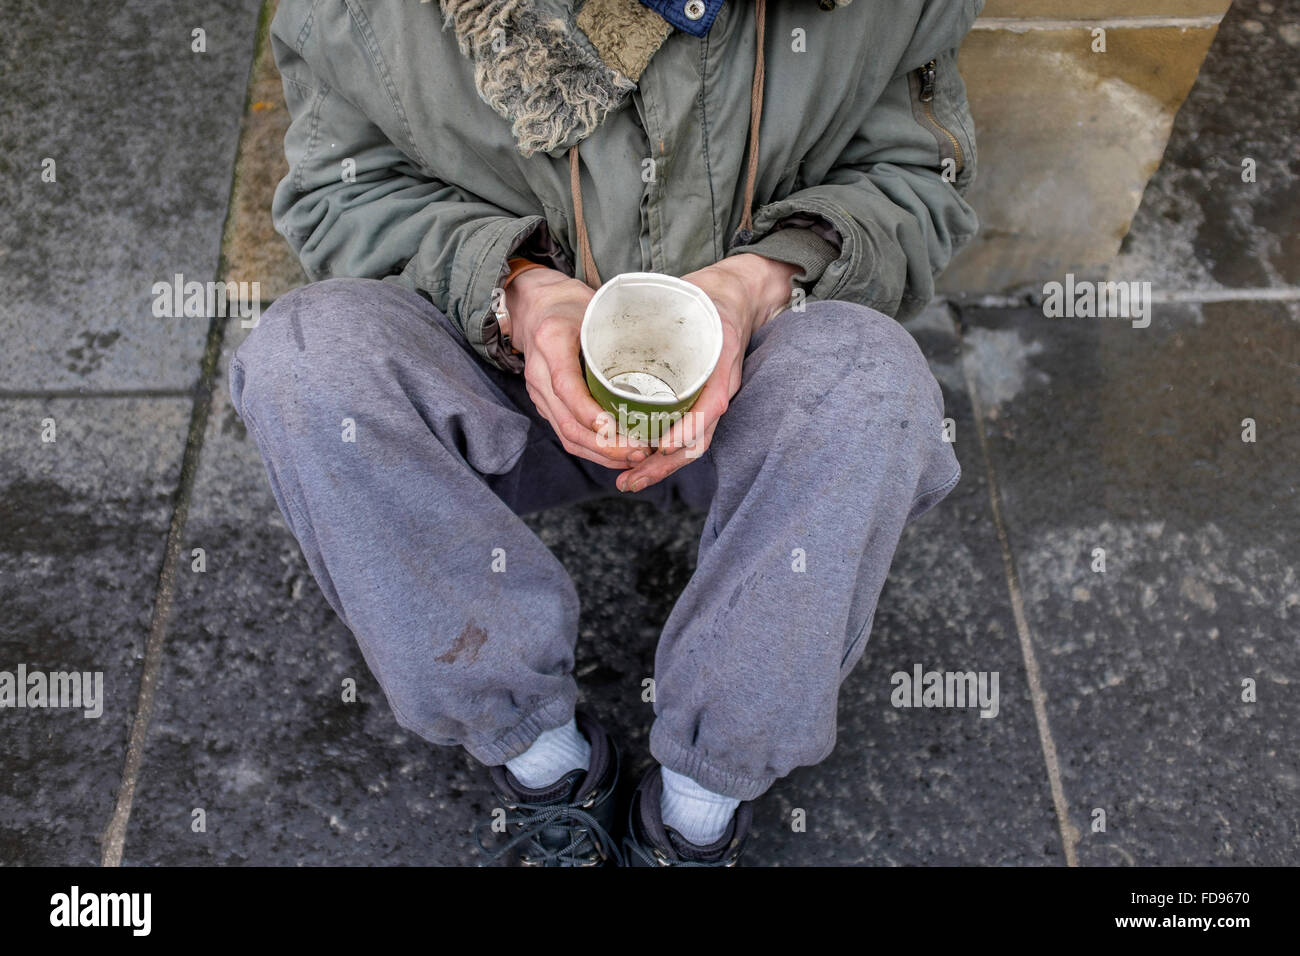 Street beggar, sitting on a pavement with a cardboard cup for collecting money and charity. Stock Photo